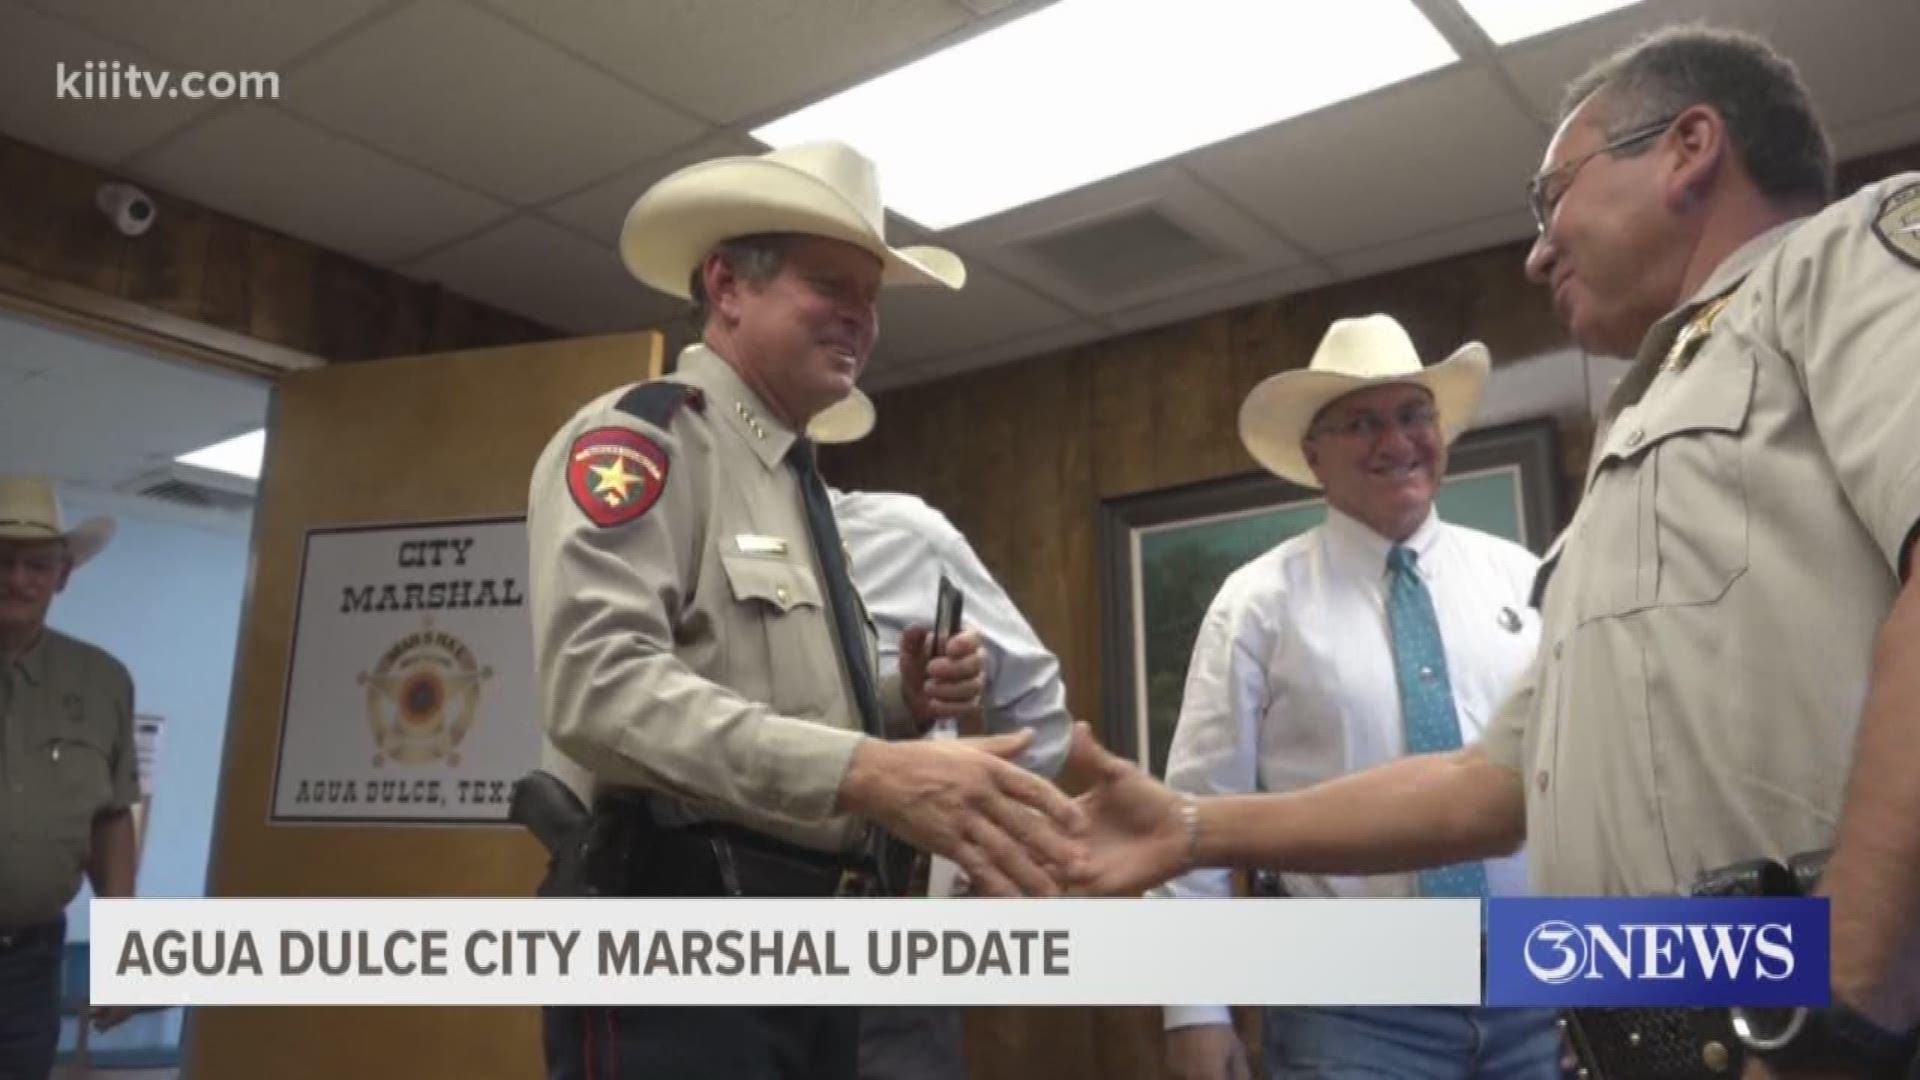 The First marshal for the City of Agua Dulce in 75 years talks about the importance of partnering with surrounding county law enforcement.